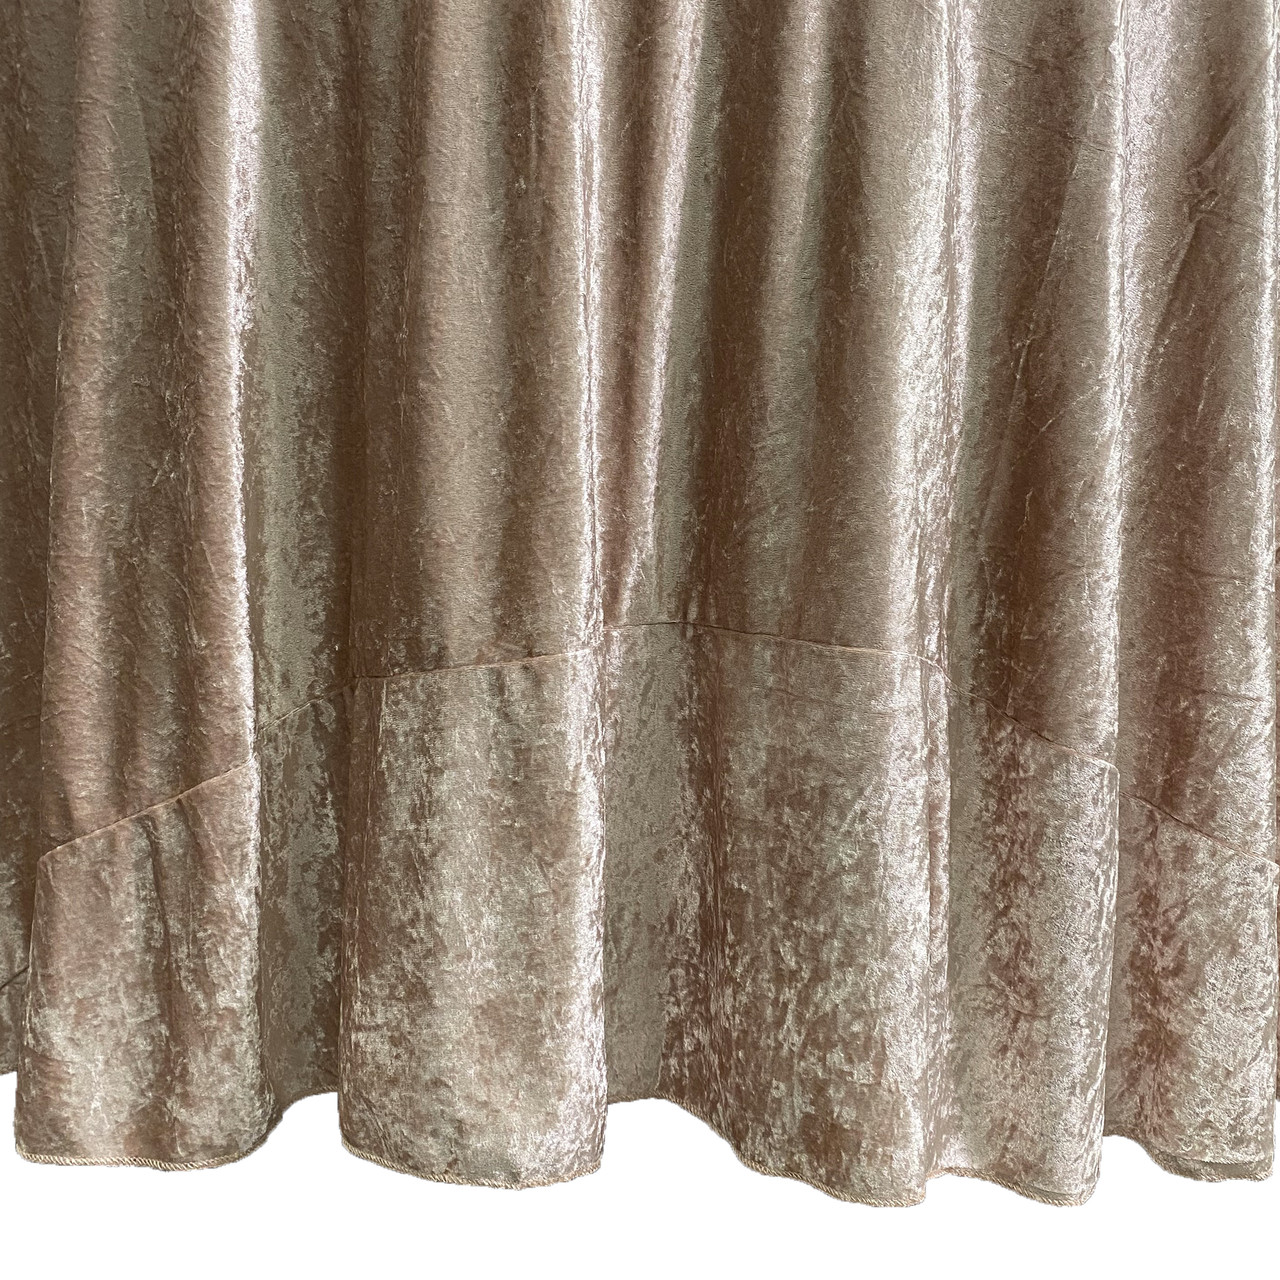 132 Inch Round Crushed Velvet Tablecloth Champagne | Your Chair Covers Inc